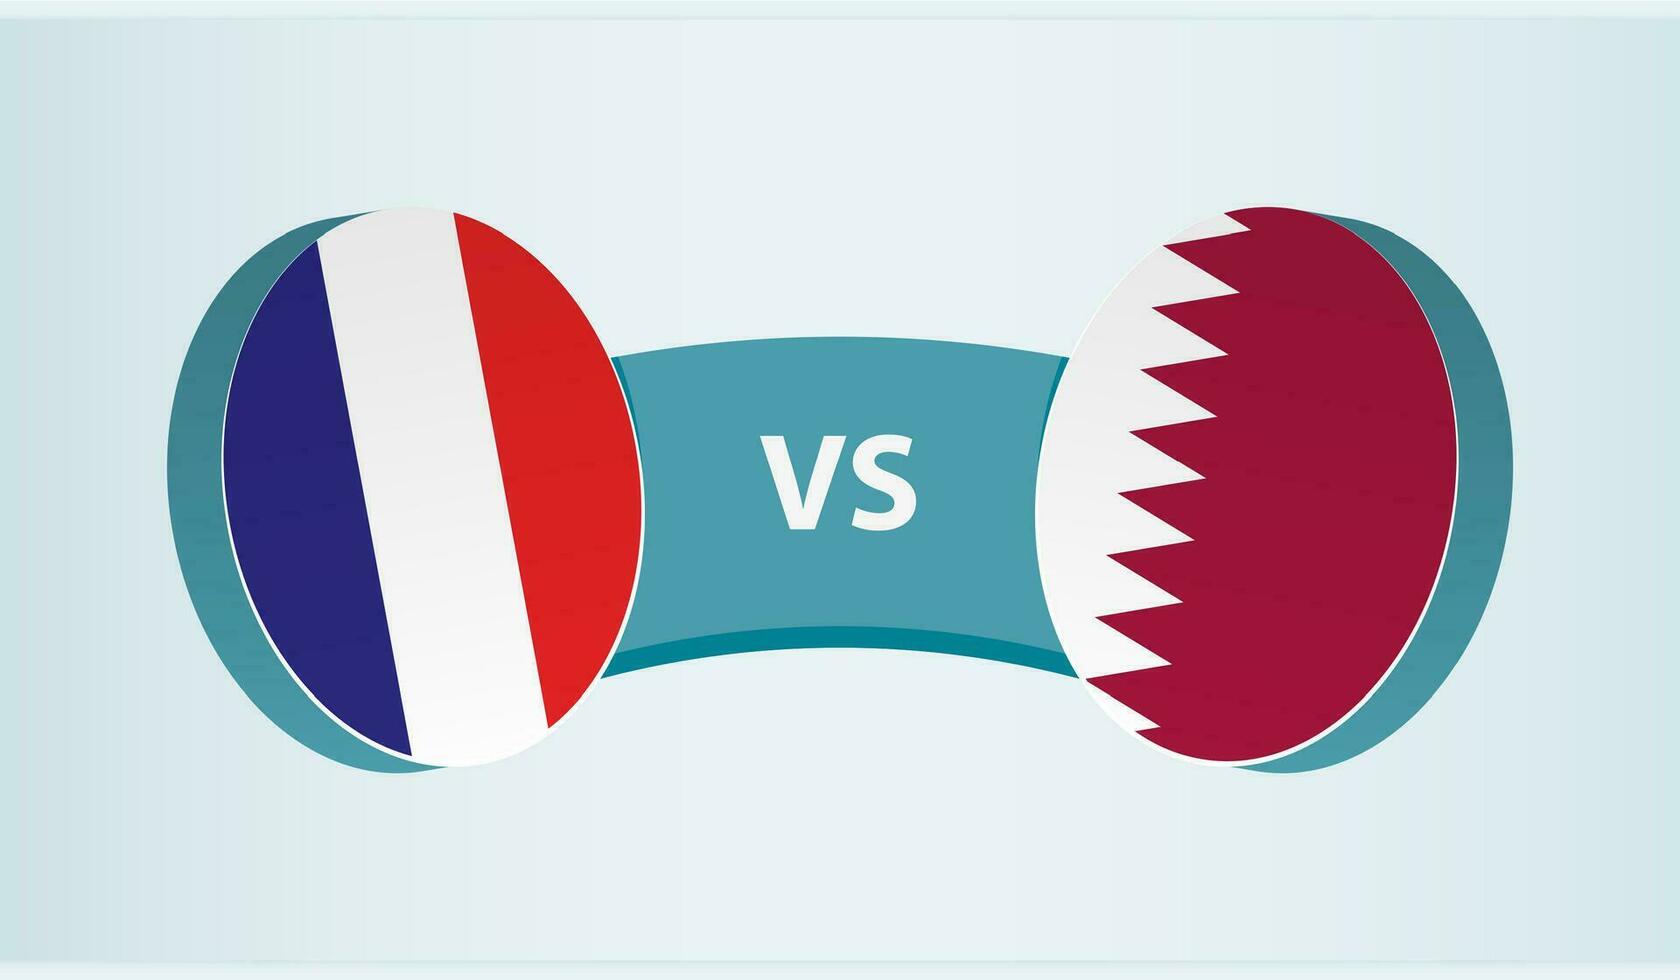 France versus Qatar, team sports competition concept. vector